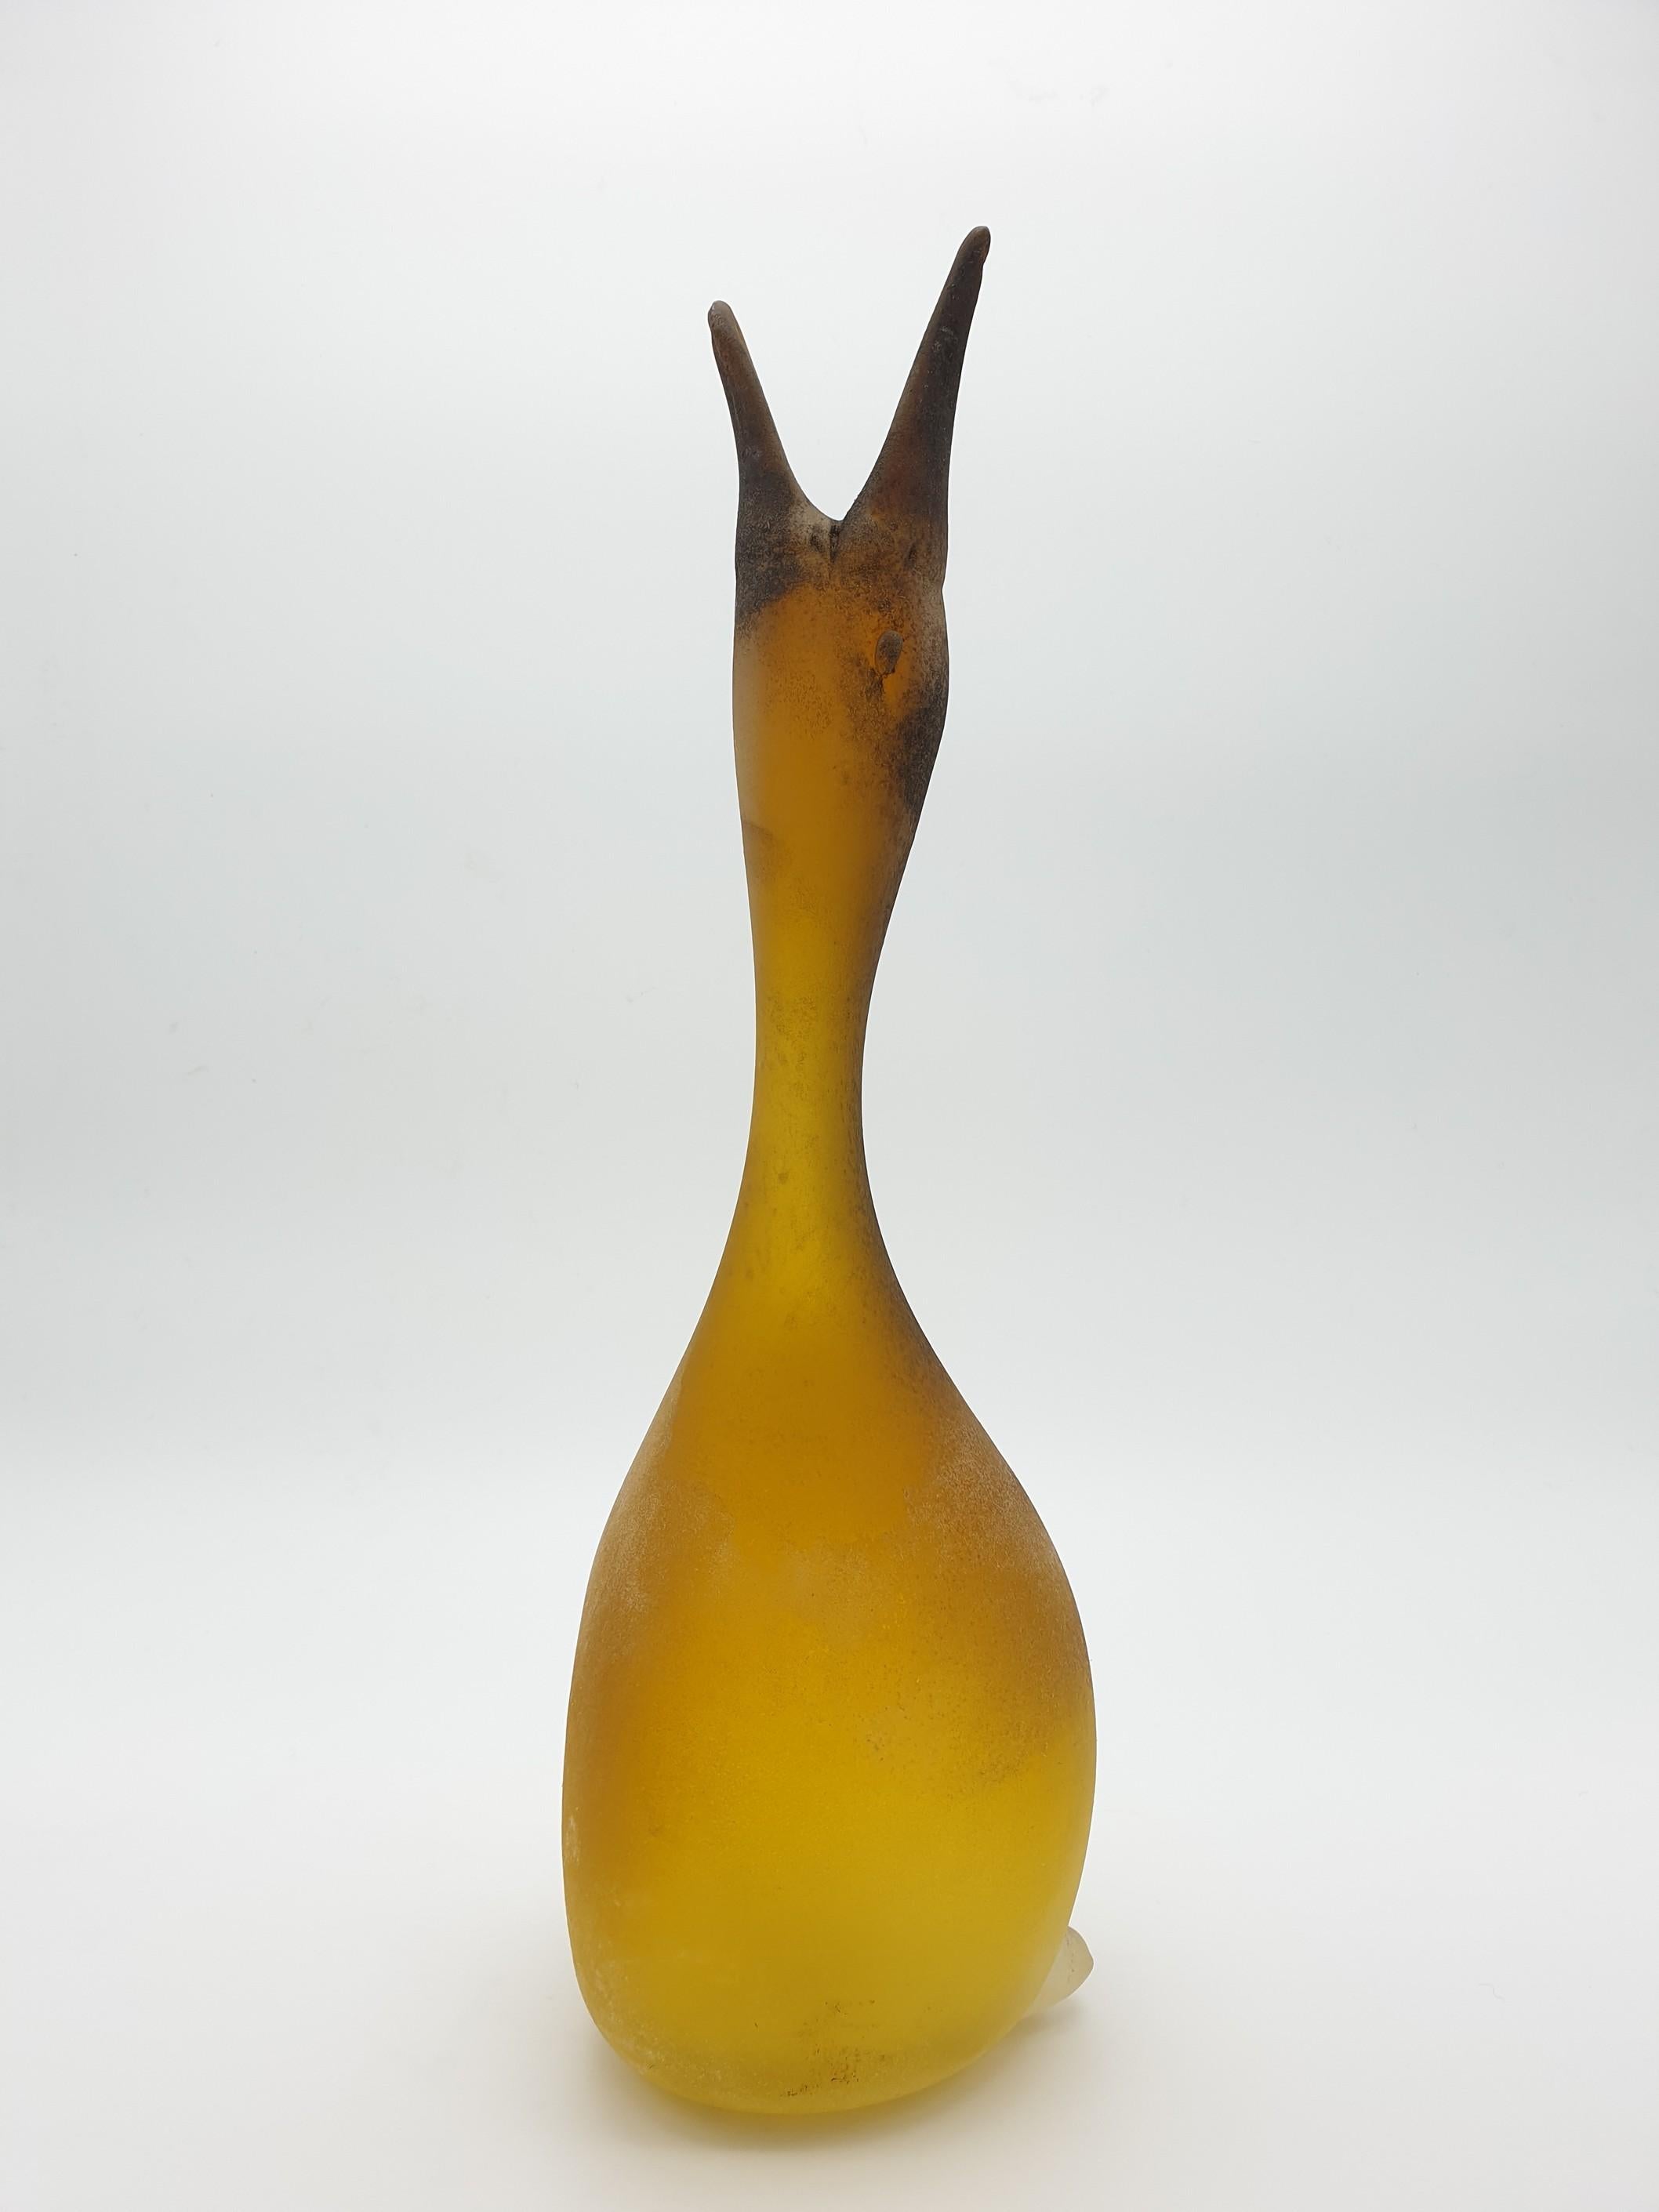 Modern Large Murano Glass Duck Vase by Antonio Da Ros at Gino Cenedese, 1960s For Sale 5